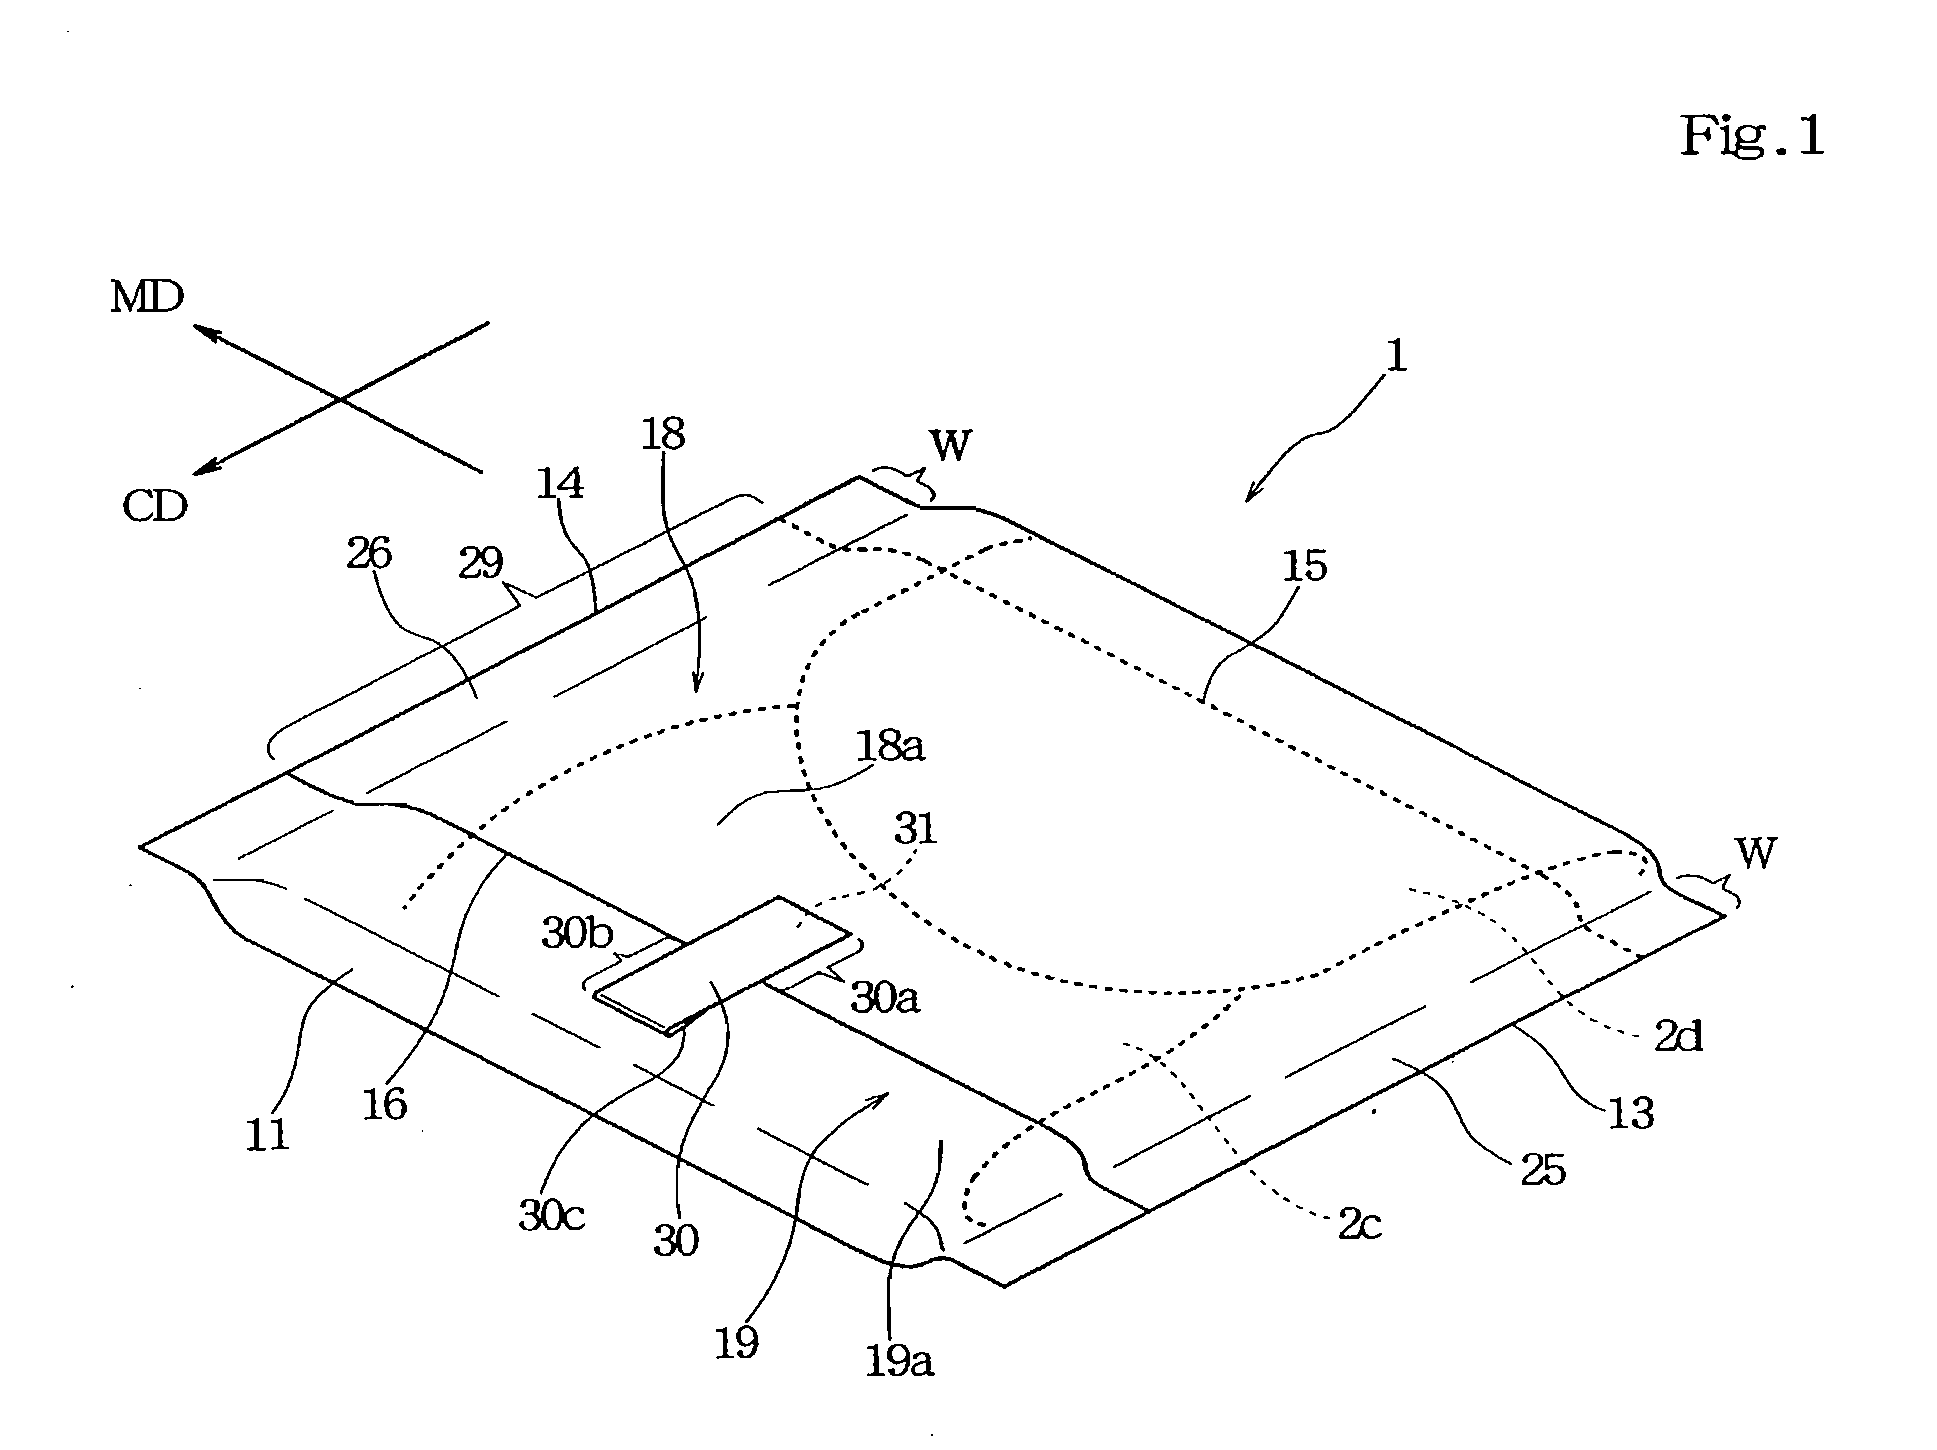 Individual package of absorbent article